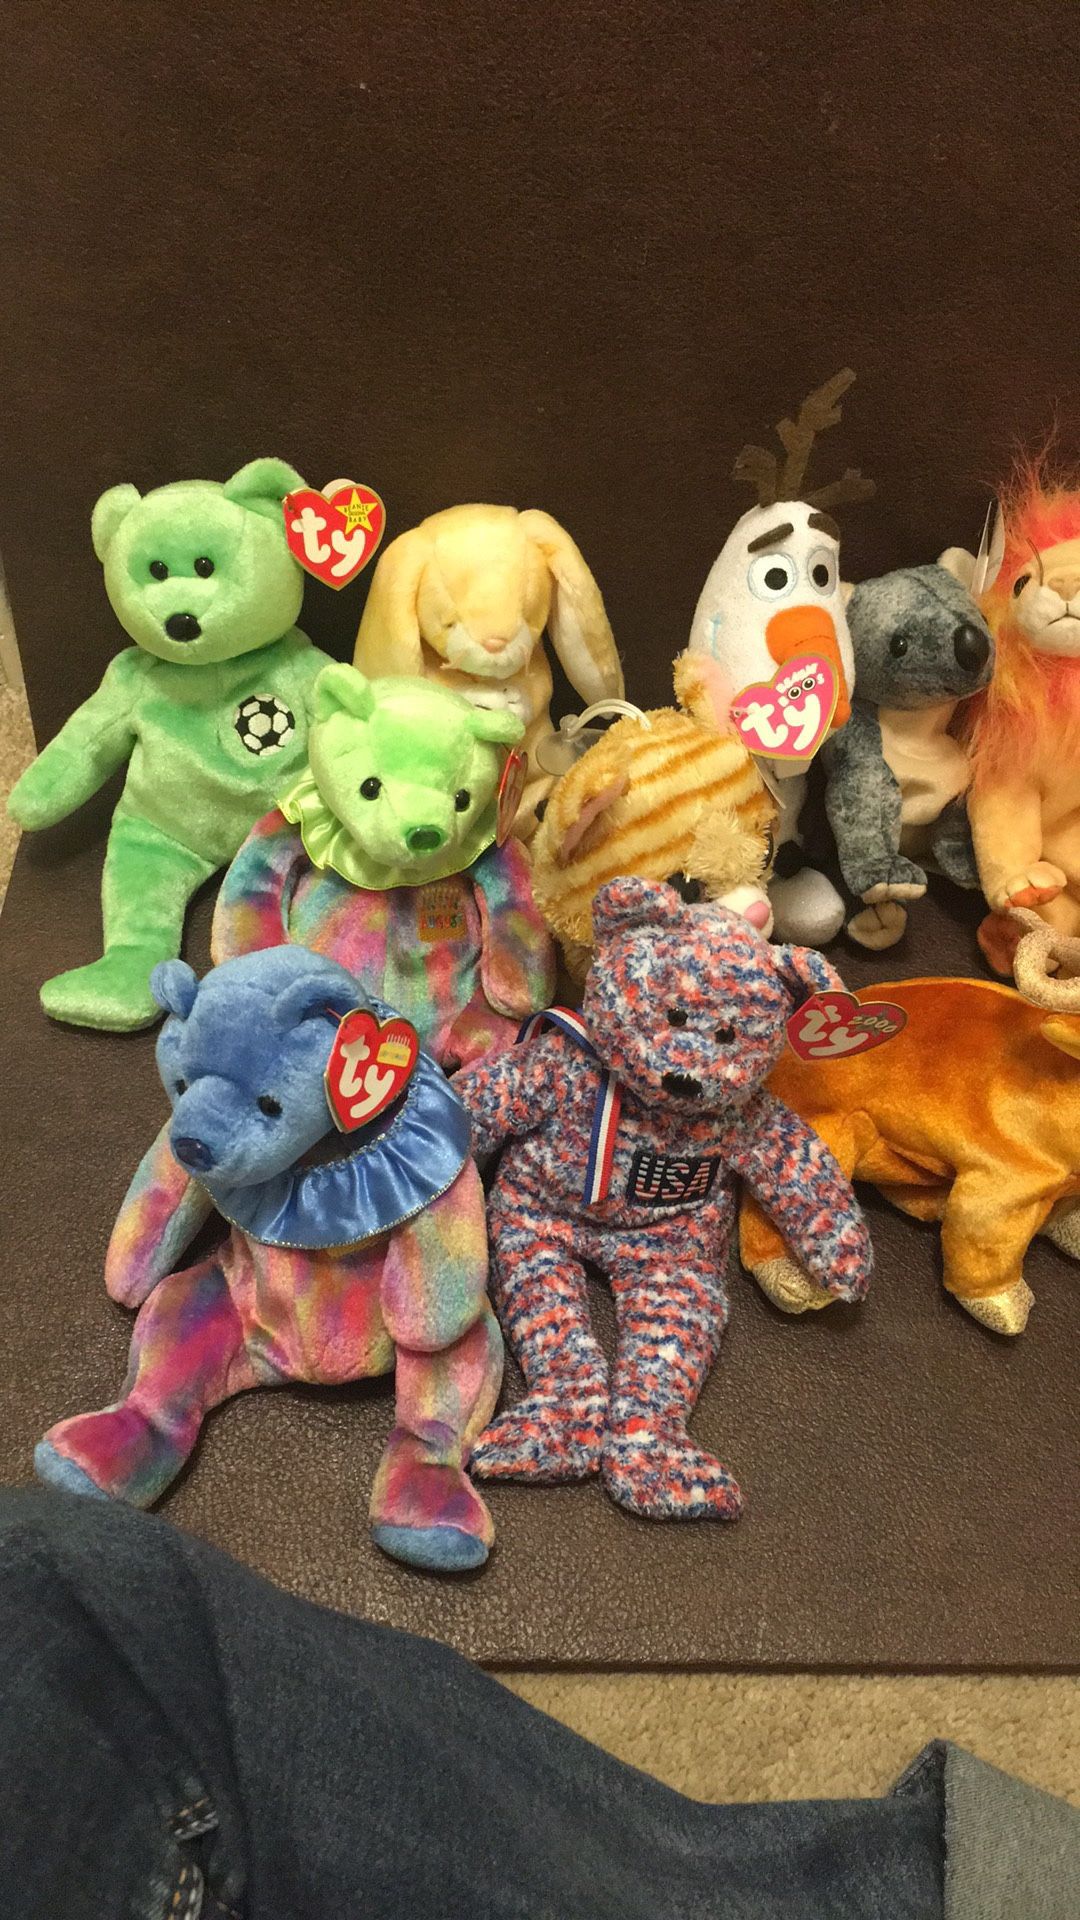 16 beanie babies from year 1999 to 2000